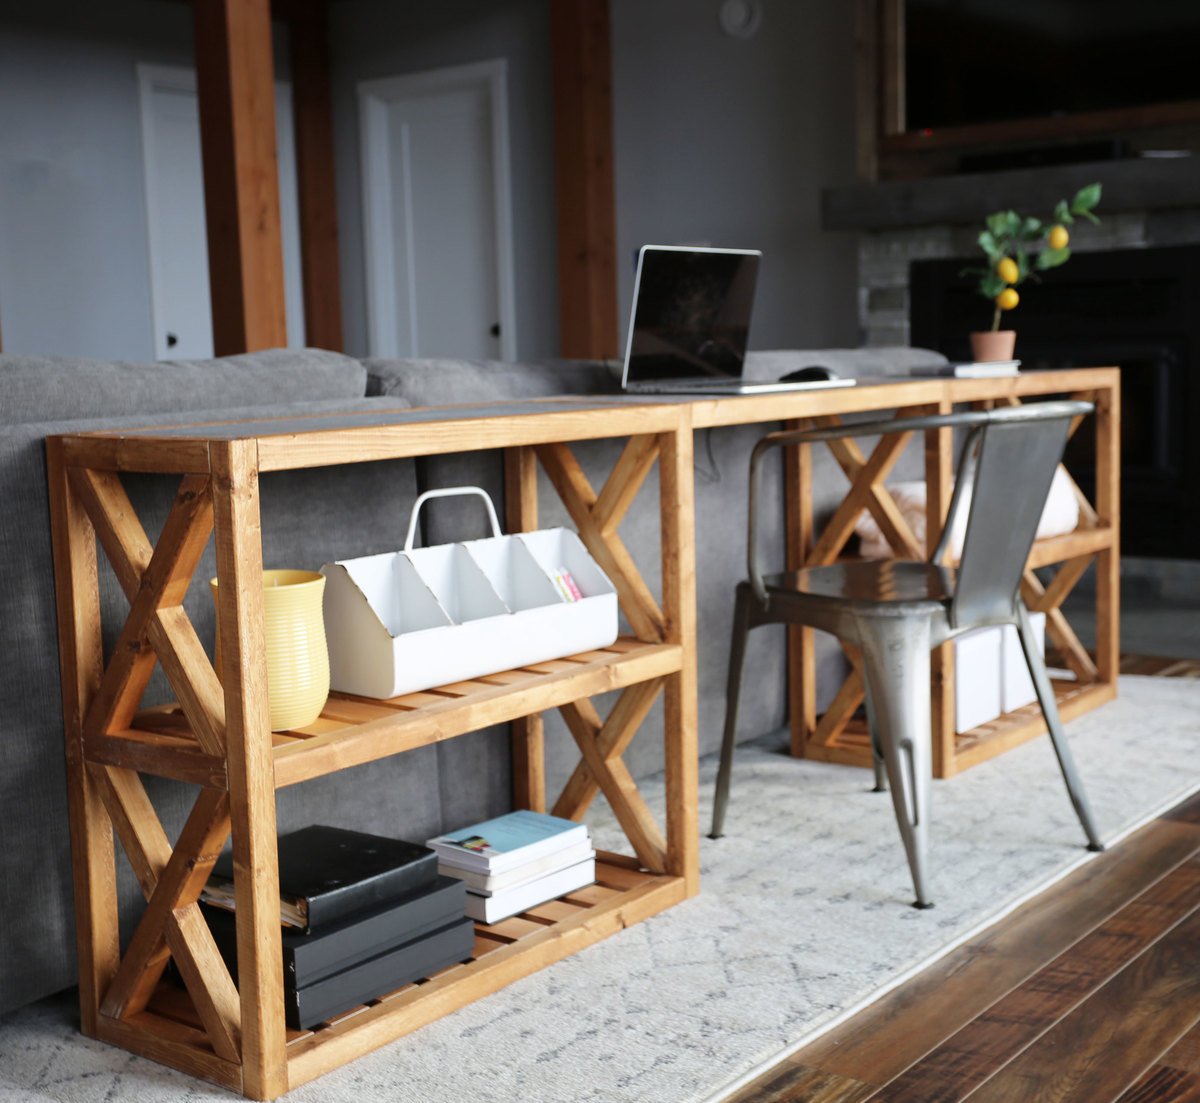 $20 Modern Farmhouse Console Table - Inspired by Pottery Barn Grove Console Table